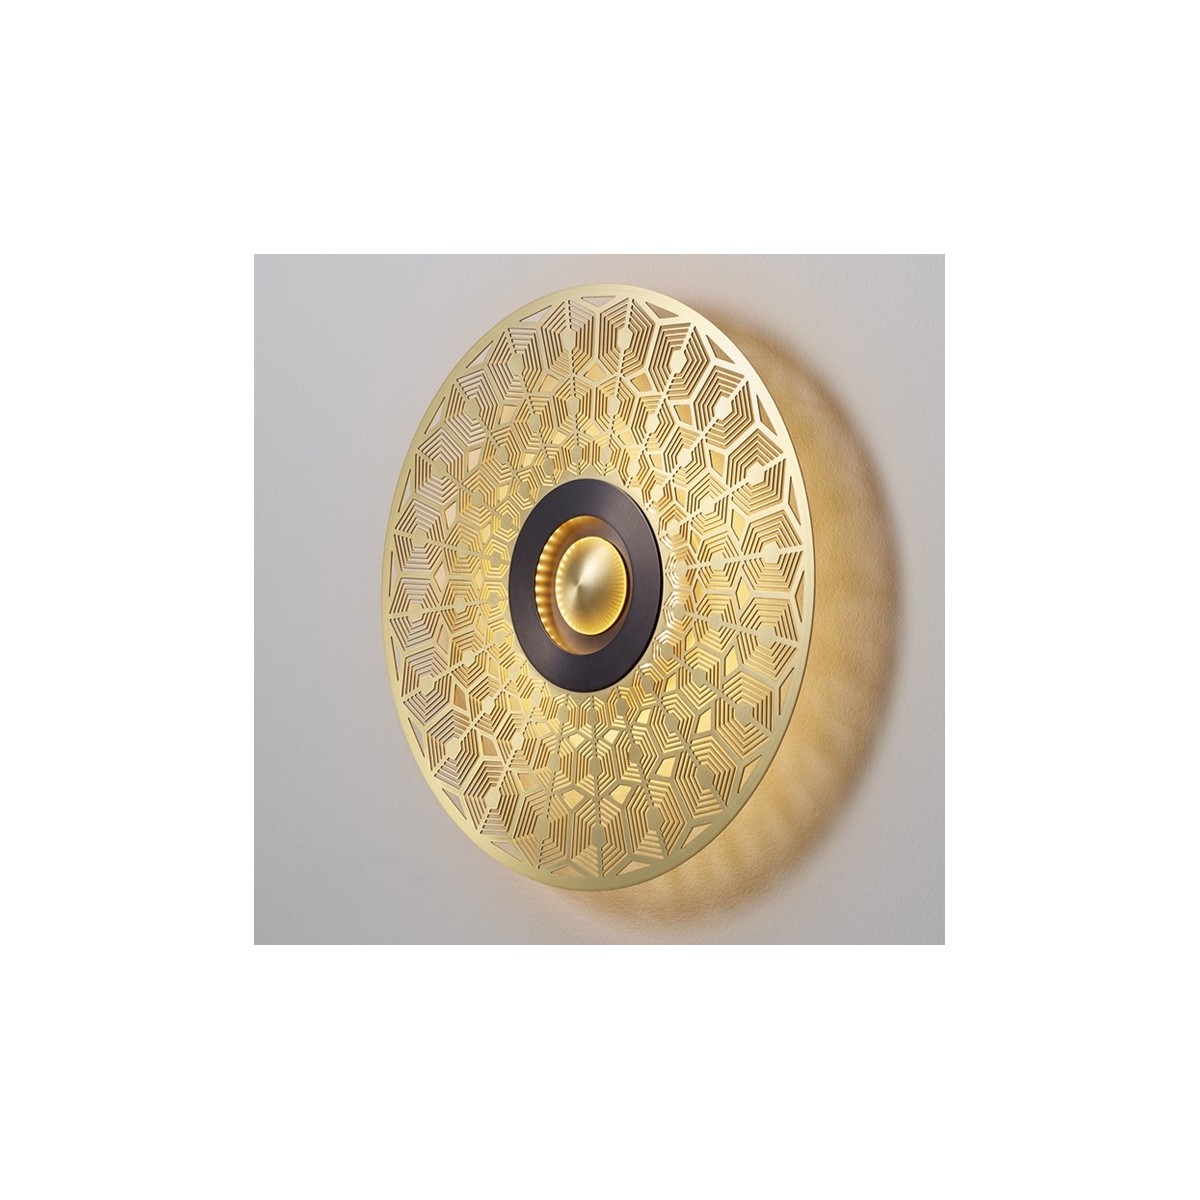 Ø44cm - brass / graphite - Earth Turtle - wall / ceiling lamp - OFFER